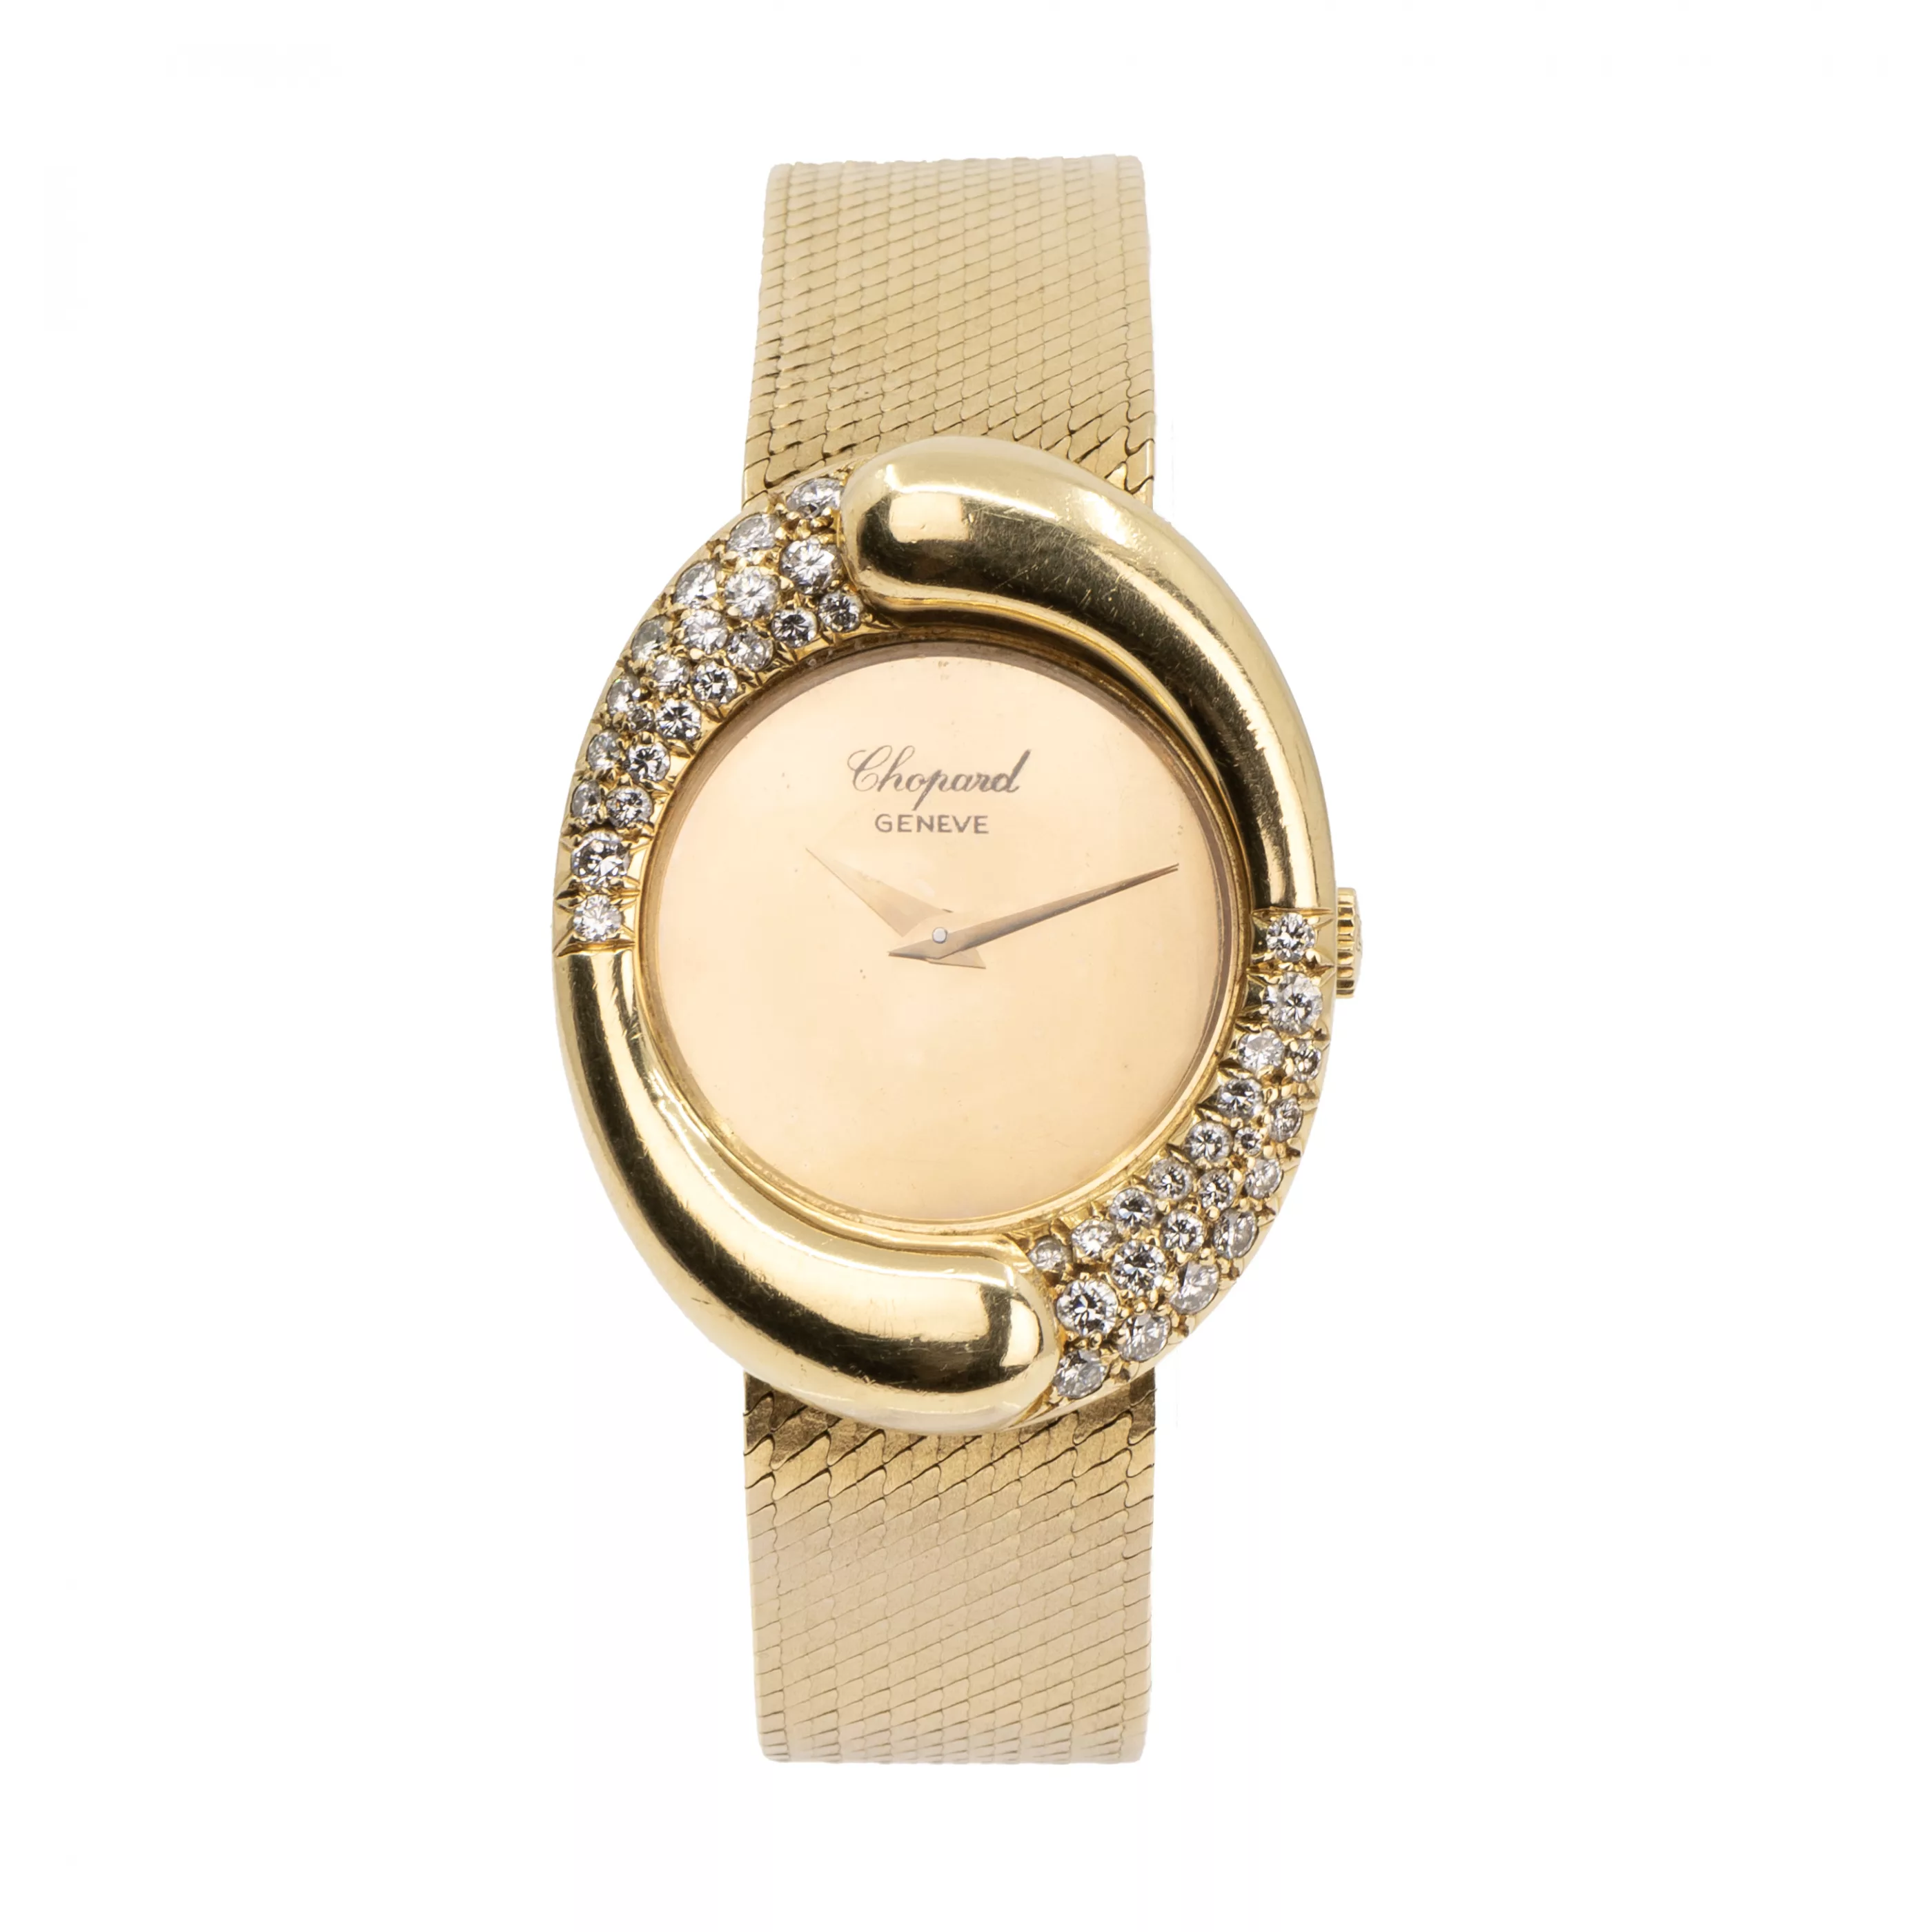 Chopard 4010 1 22mm Yellow gold and diamonds Gold